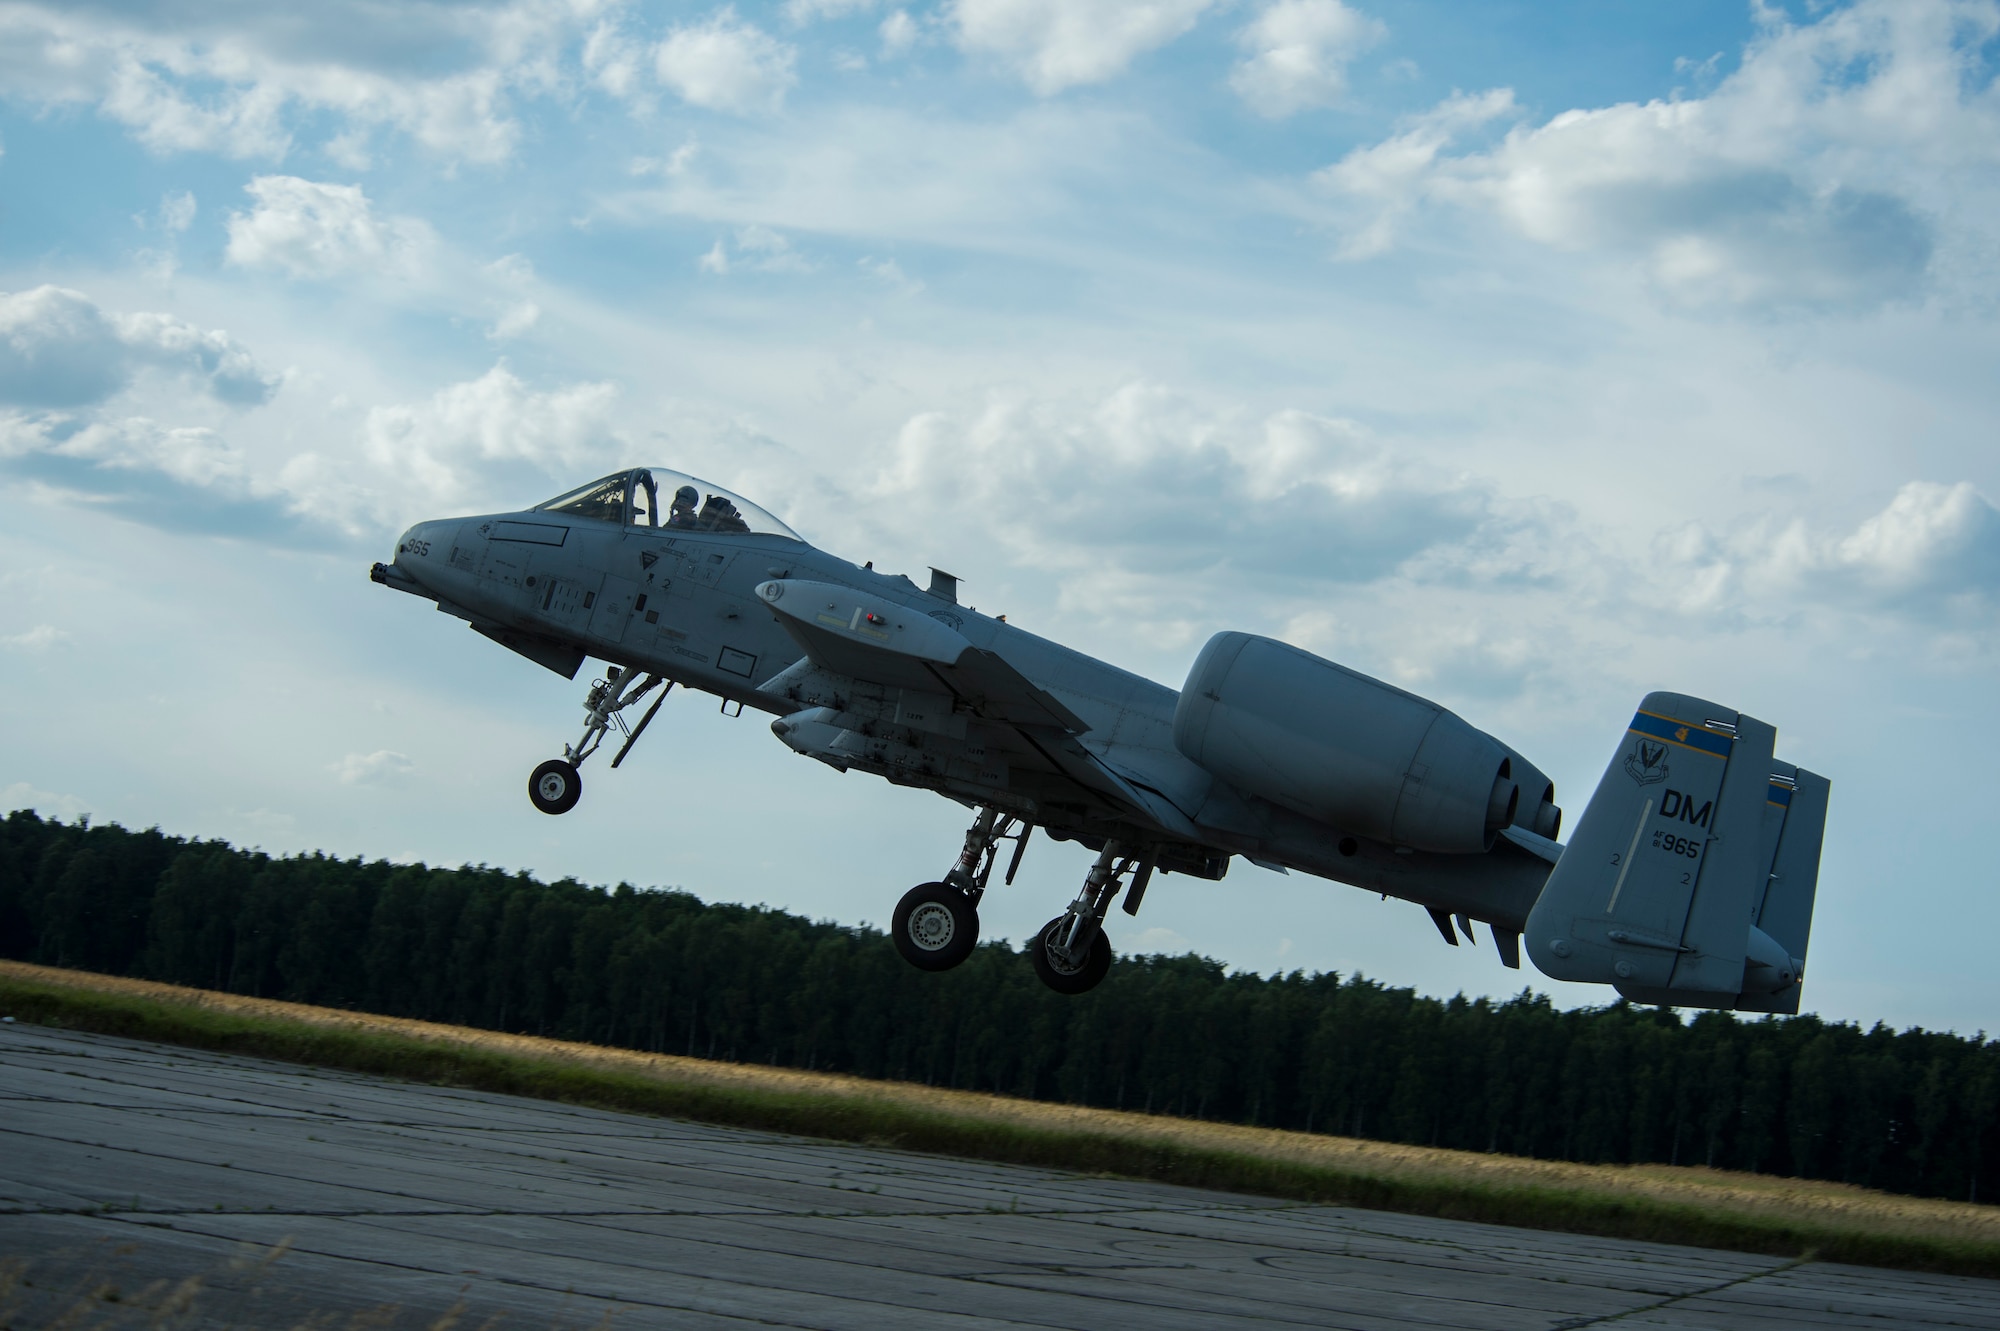 A 354th Expeditionary Fighter Squadron A-10C Thunderbolt II aircraft takes off during an austere landing training exercise at Nowe Miasto, Poland, July 20, 2015. The deployed A-10s are part of the first European Theater Security Package. (U.S. Air Force photo by Airman 1st Class Luke Kitterman/Released)